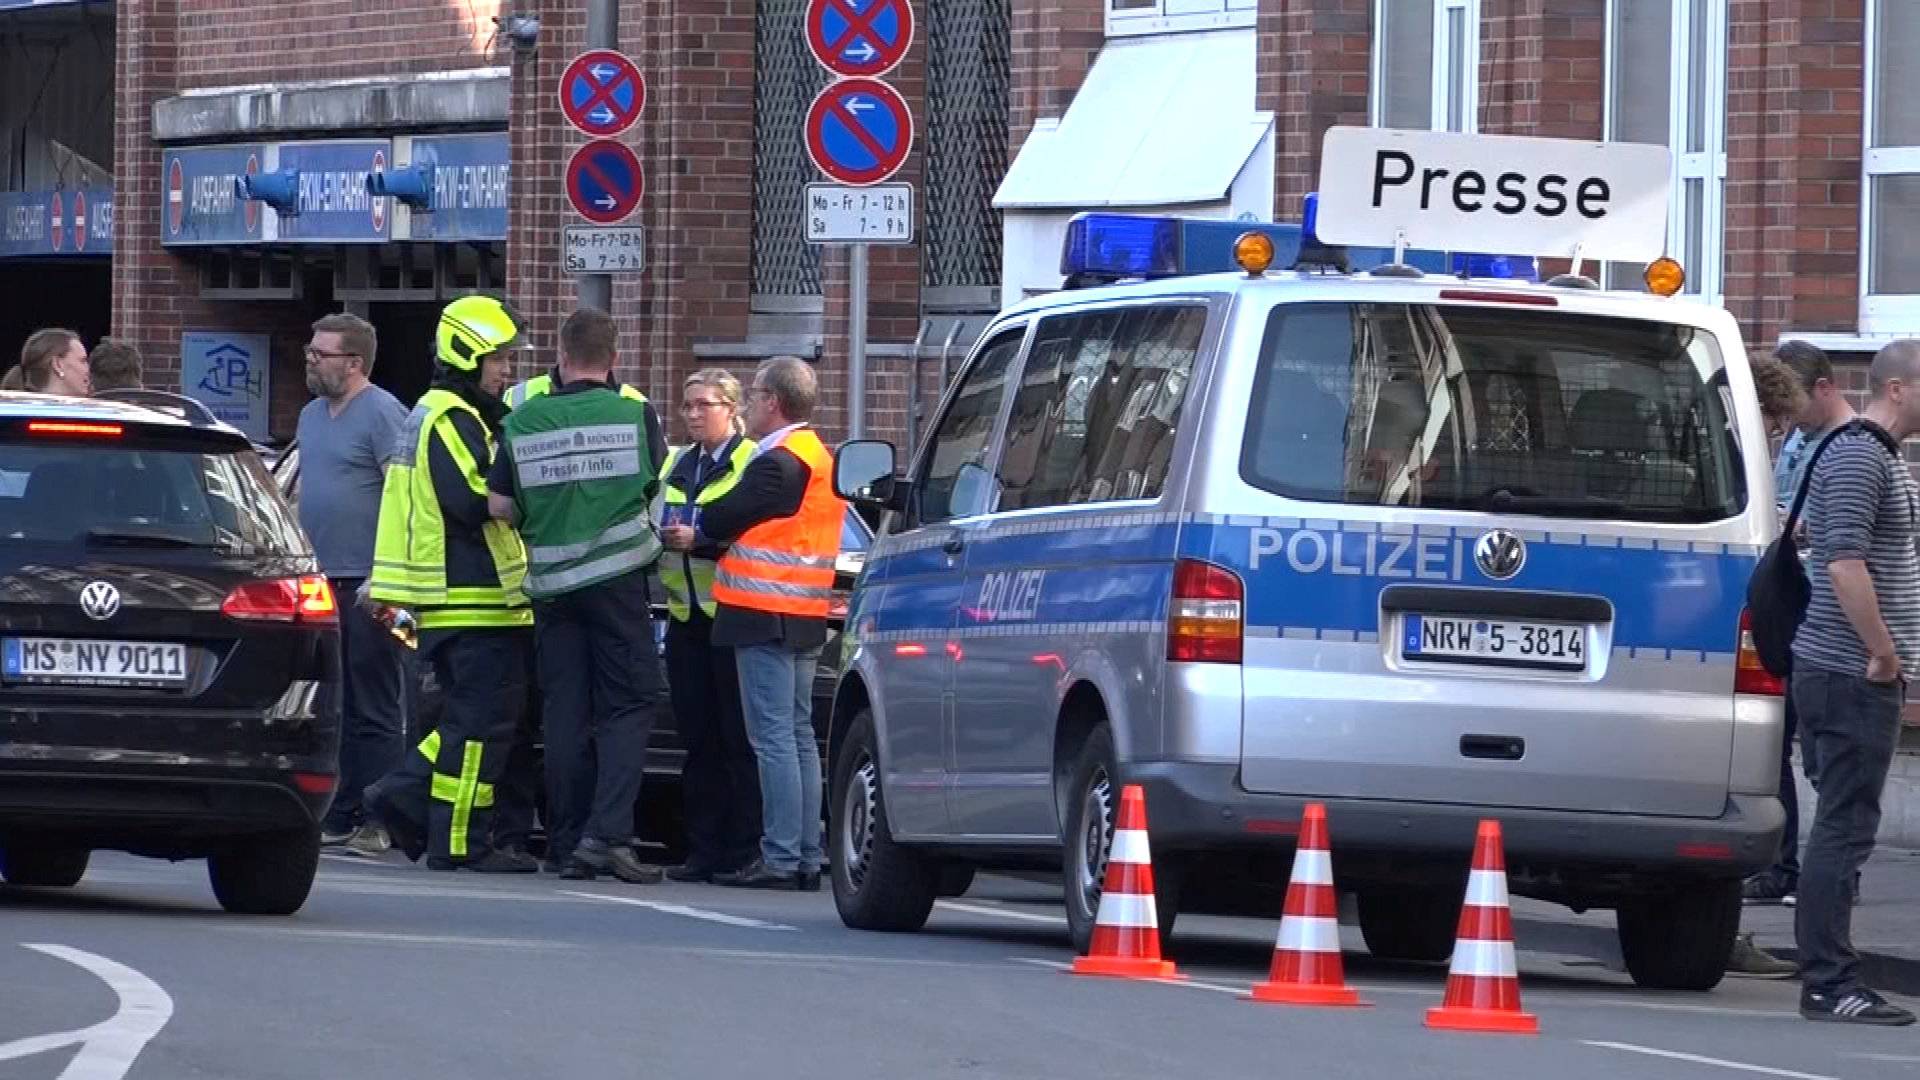 Police block a street in Muenster where a vehicle drove into a group of people killing several and injured many